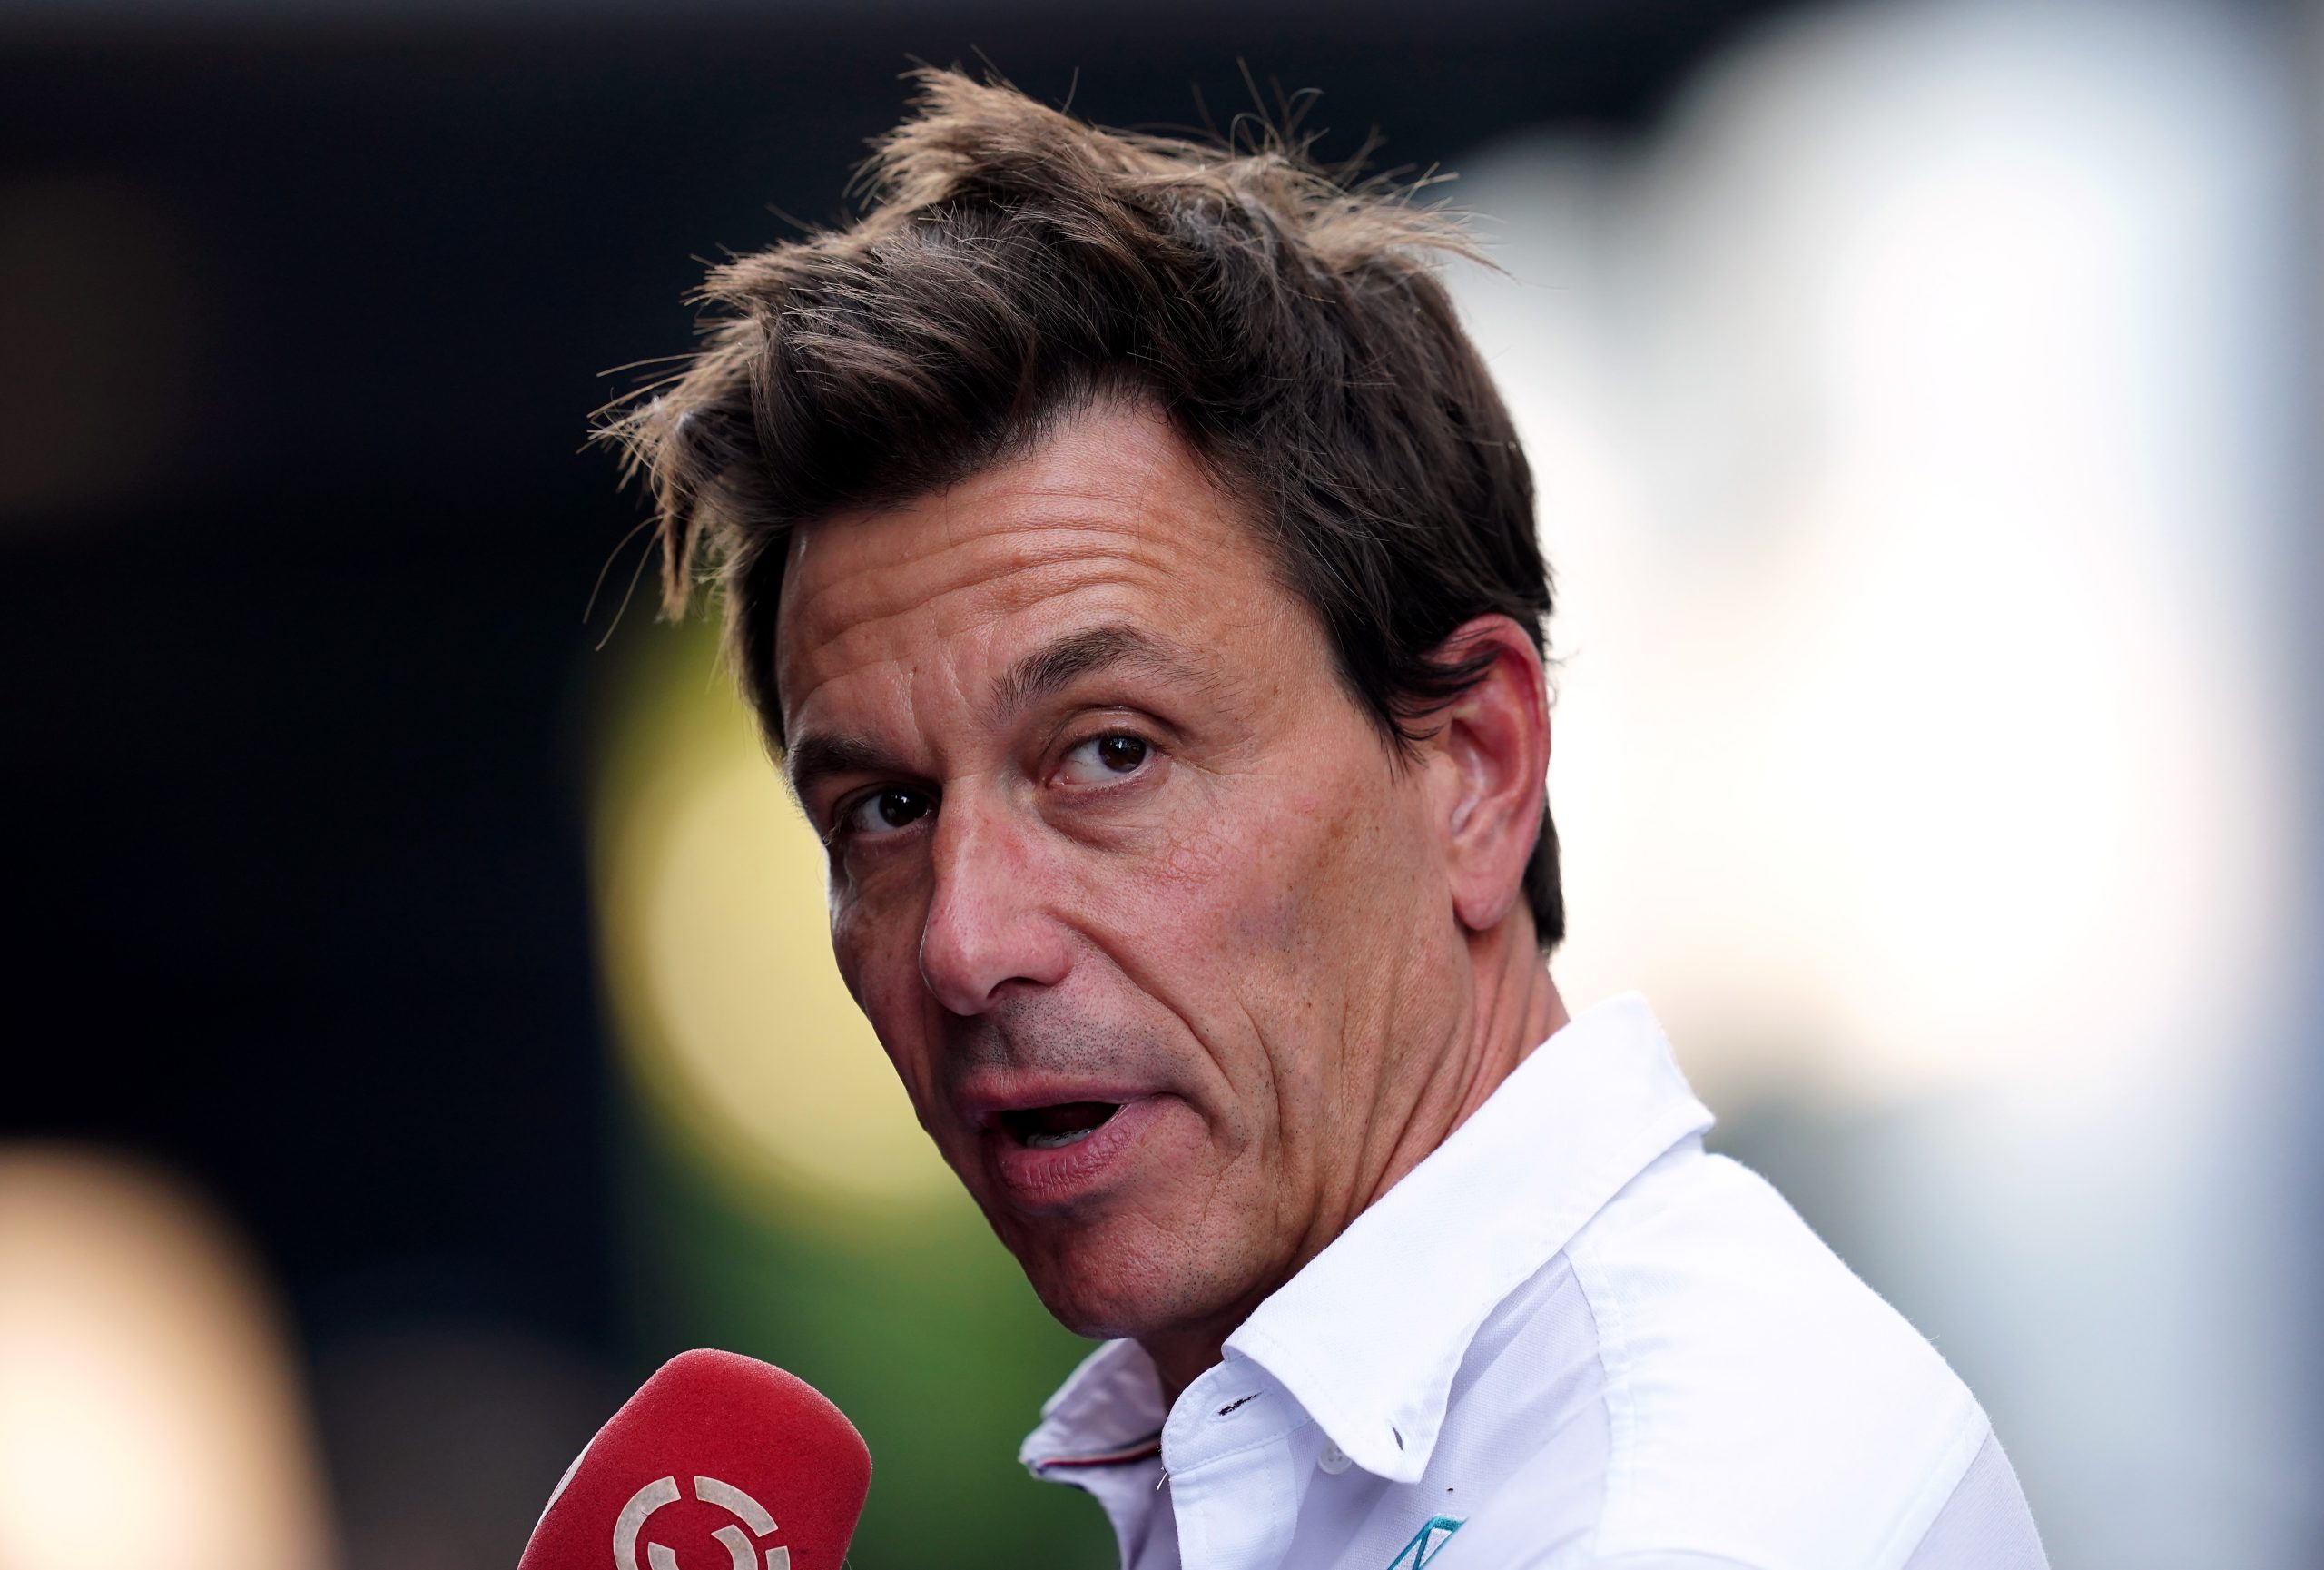 Toto Wolff urges FIA to enforce regulations over reported Red Bull budget breach